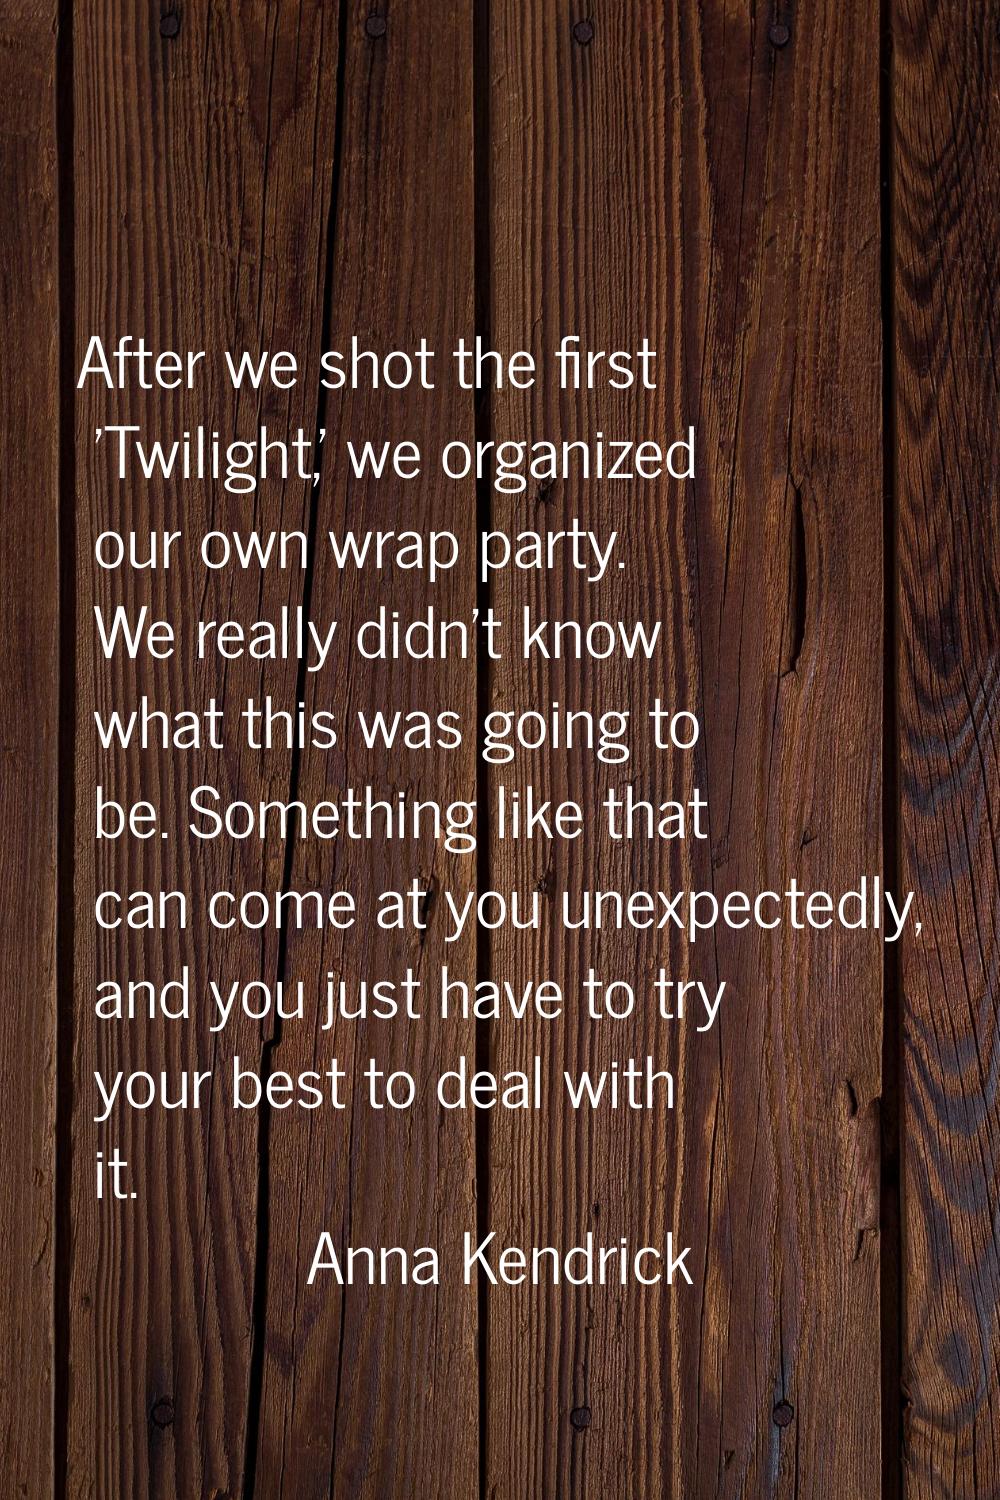 After we shot the first 'Twilight,' we organized our own wrap party. We really didn't know what thi